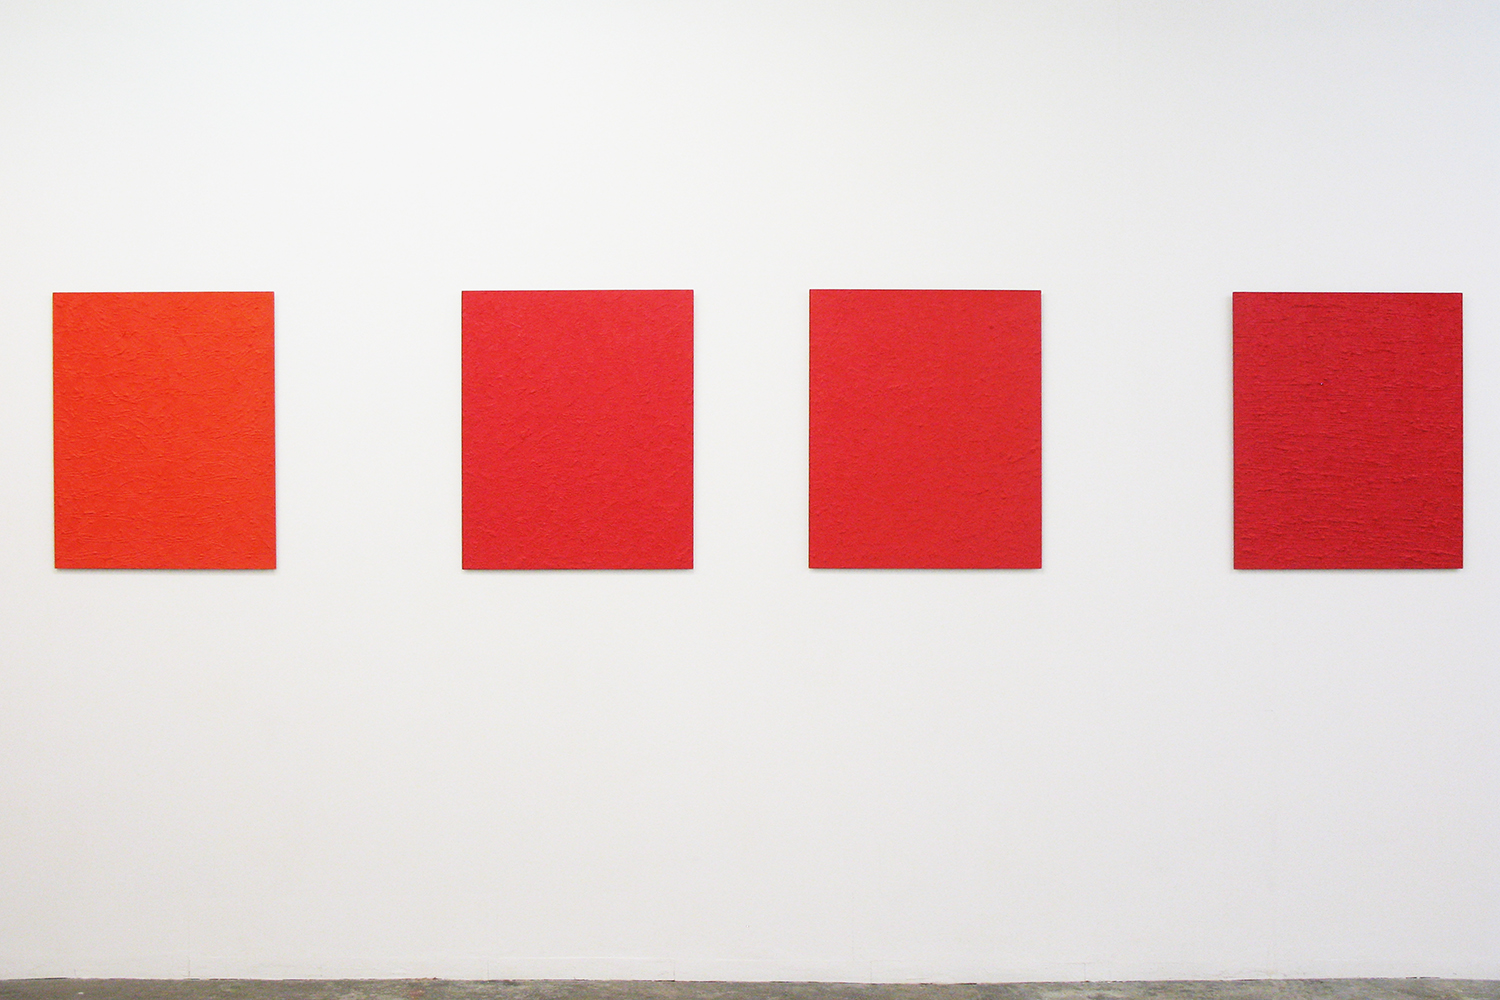 Installation View: Untitled-Red series｜ Oil on aluminum｜727 x 606 mm｜2012 each